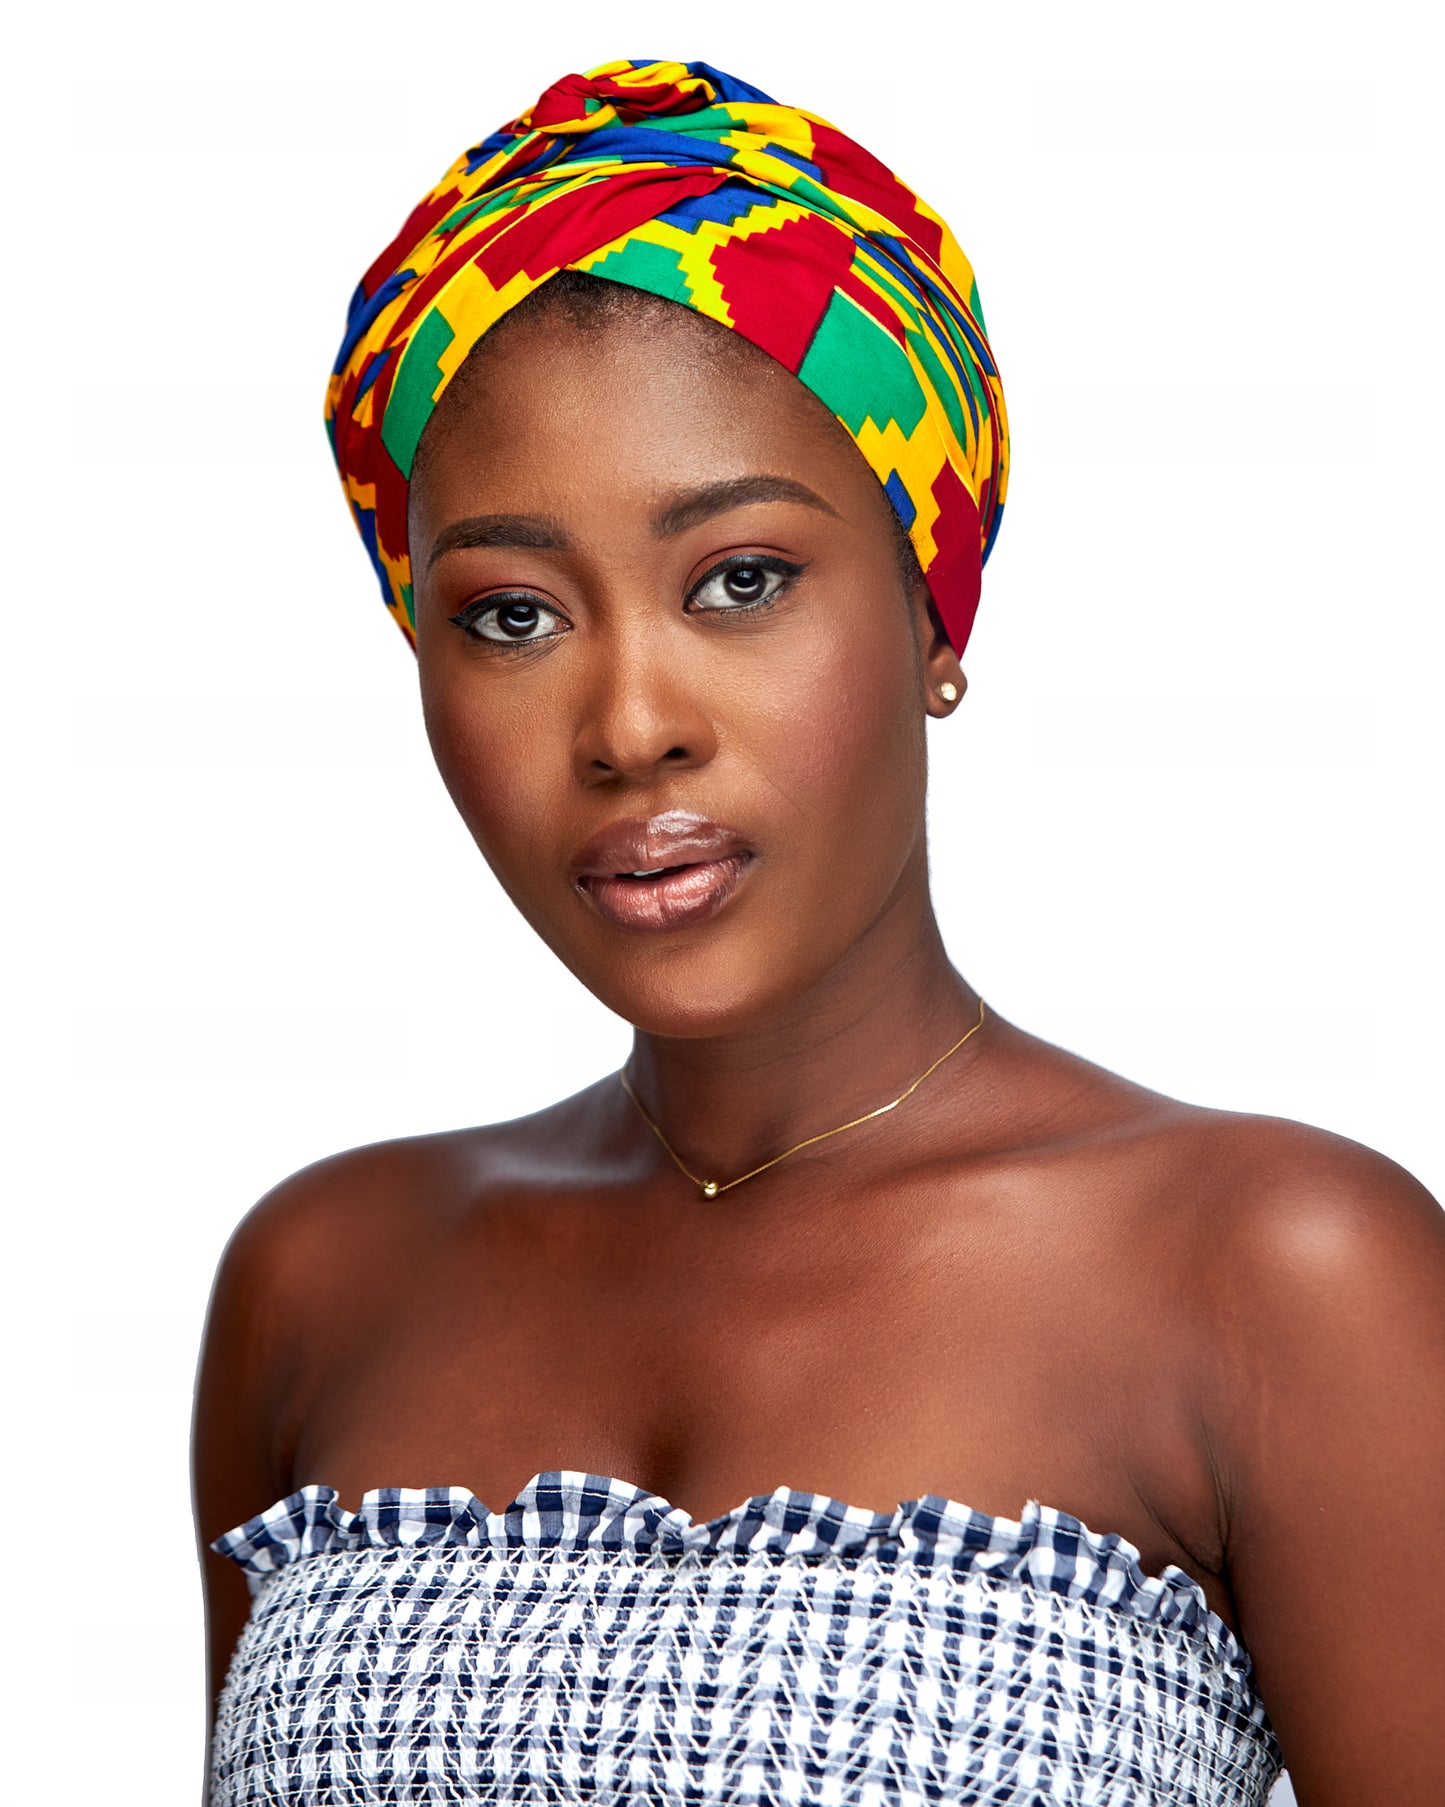 Ghanaian Kente Wax Print Made of Yellow, Red, Green, Yellow,Blue Blend of Beautiful Colours And Pattern With Adinkira Symbols, Hand Made Elastic Silklined Bonnet With Band